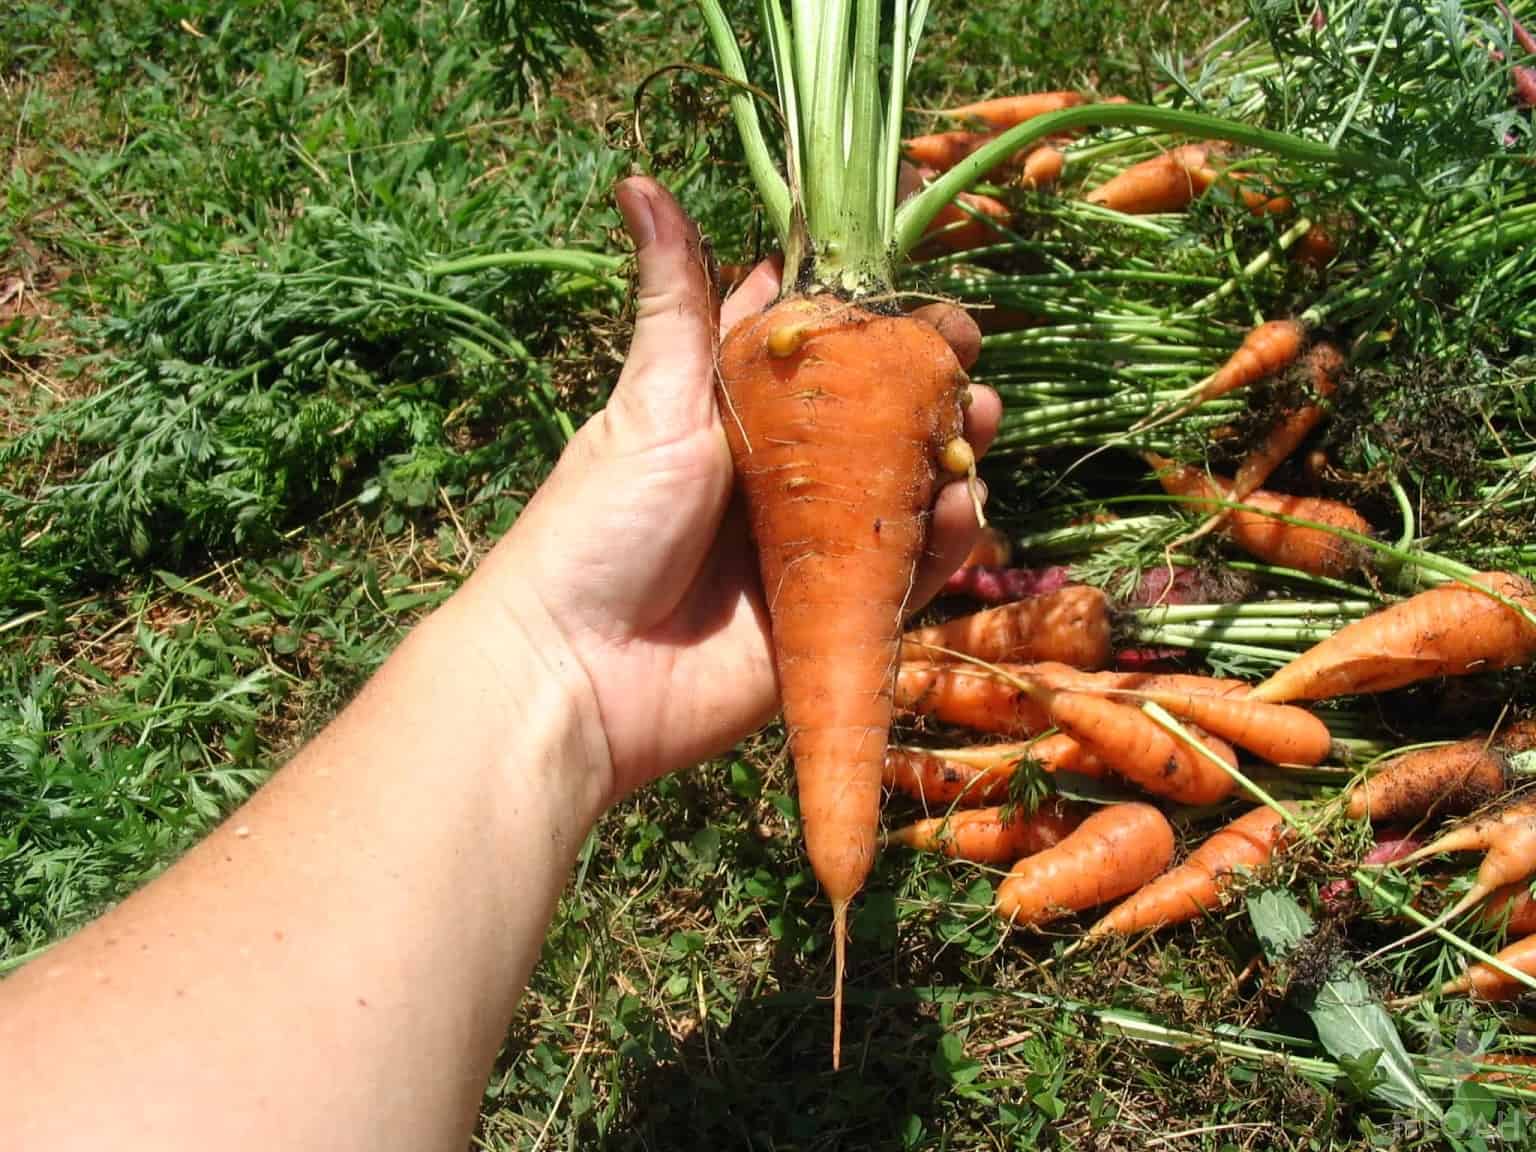 holding a large St. Valery carrot next to the harvest